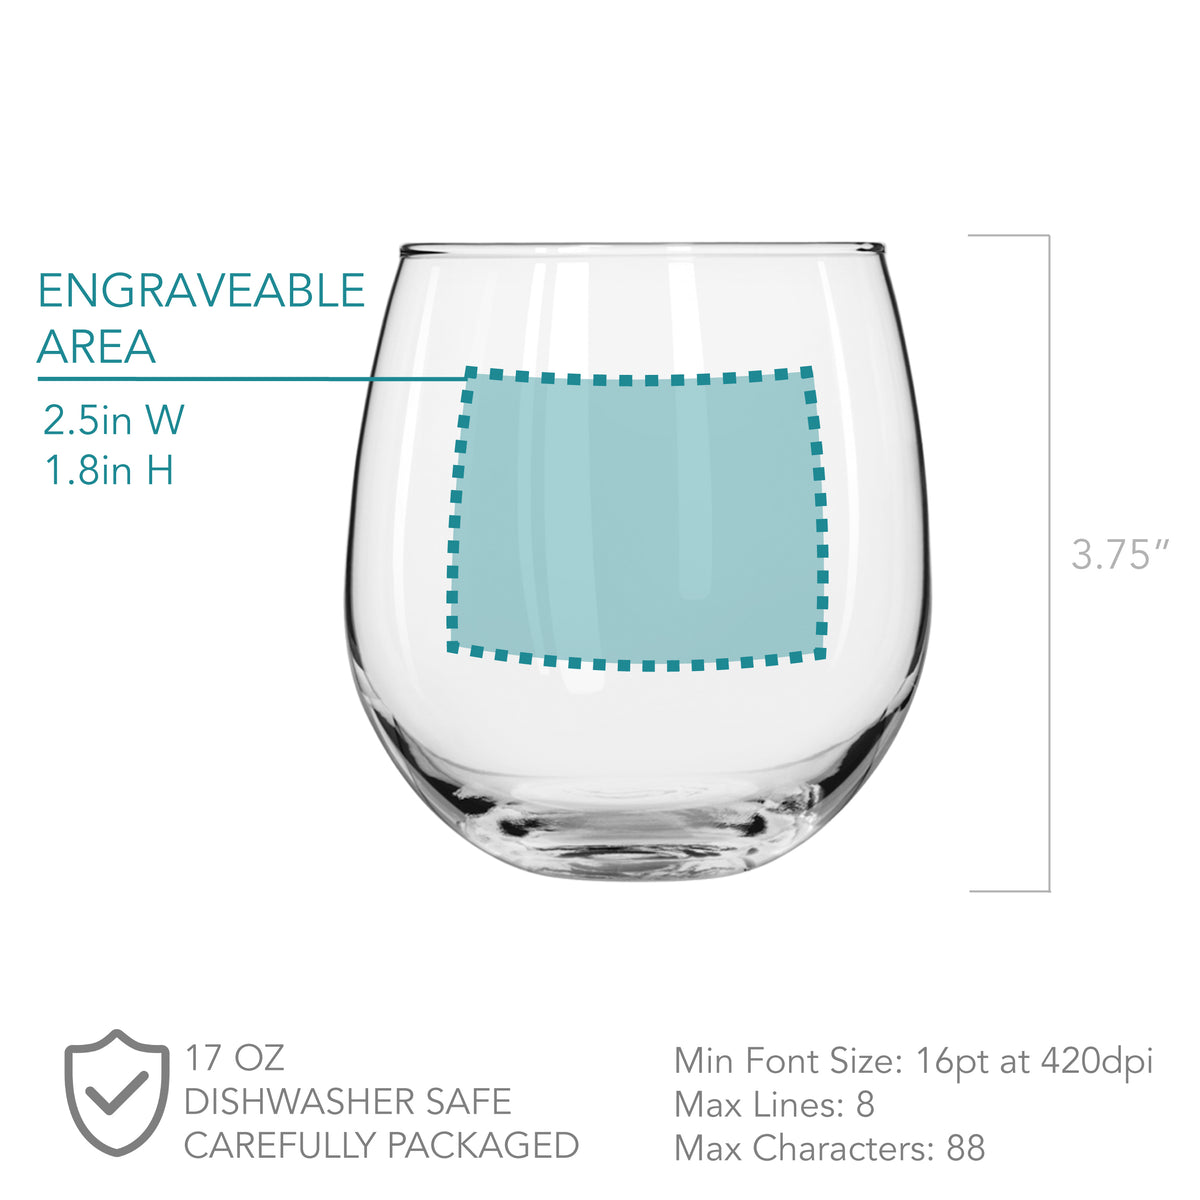 Personalized Stemless Wine Glasses - Heirloom